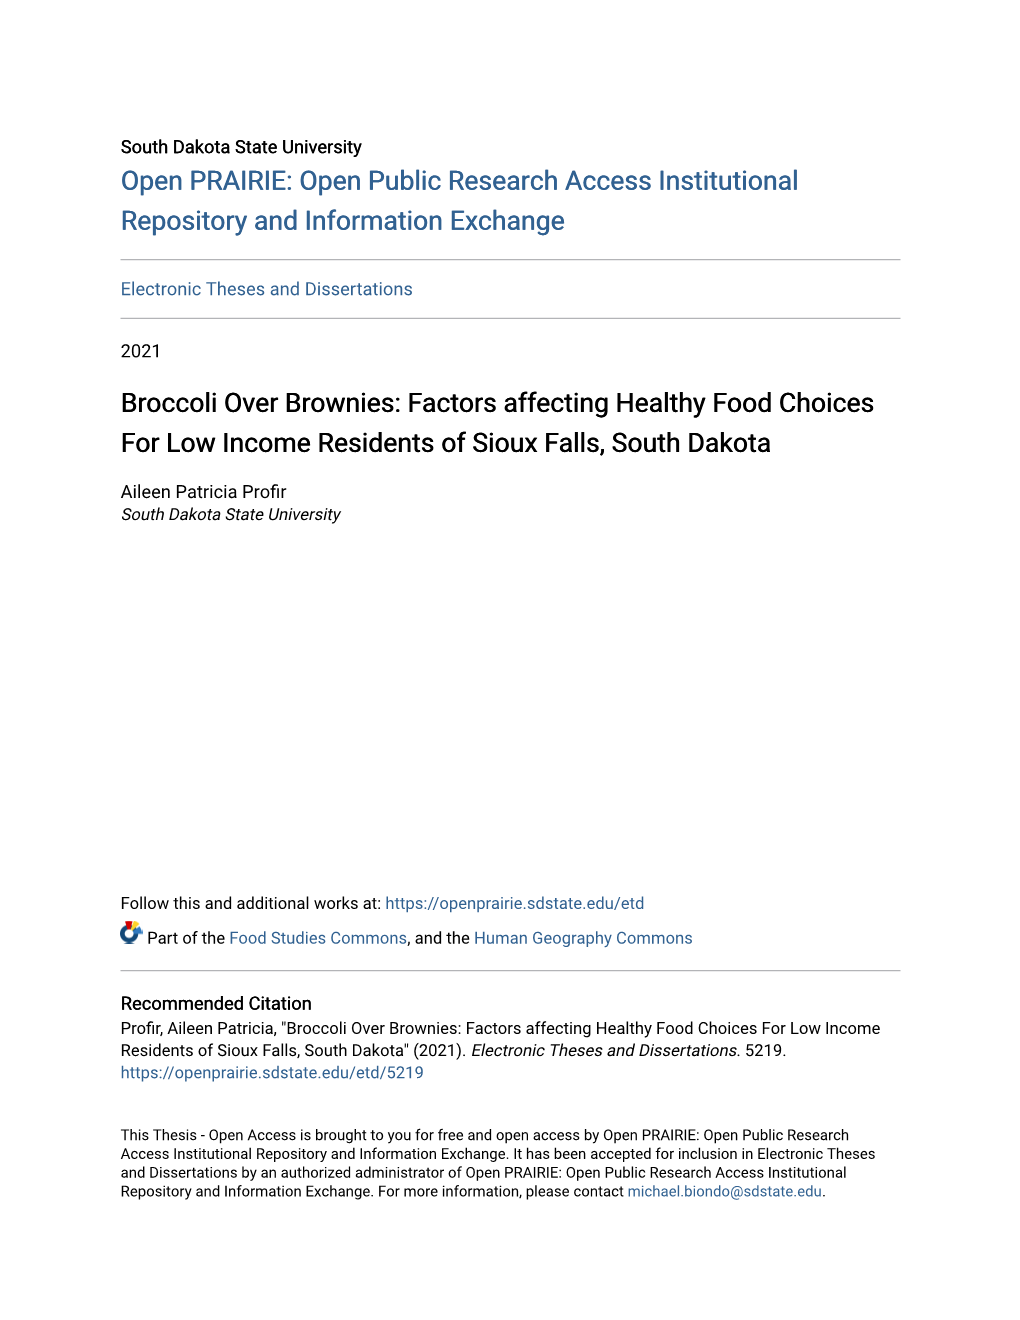 Factors Affecting Healthy Food Choices for Low Income Residents of Sioux Falls, South Dakota